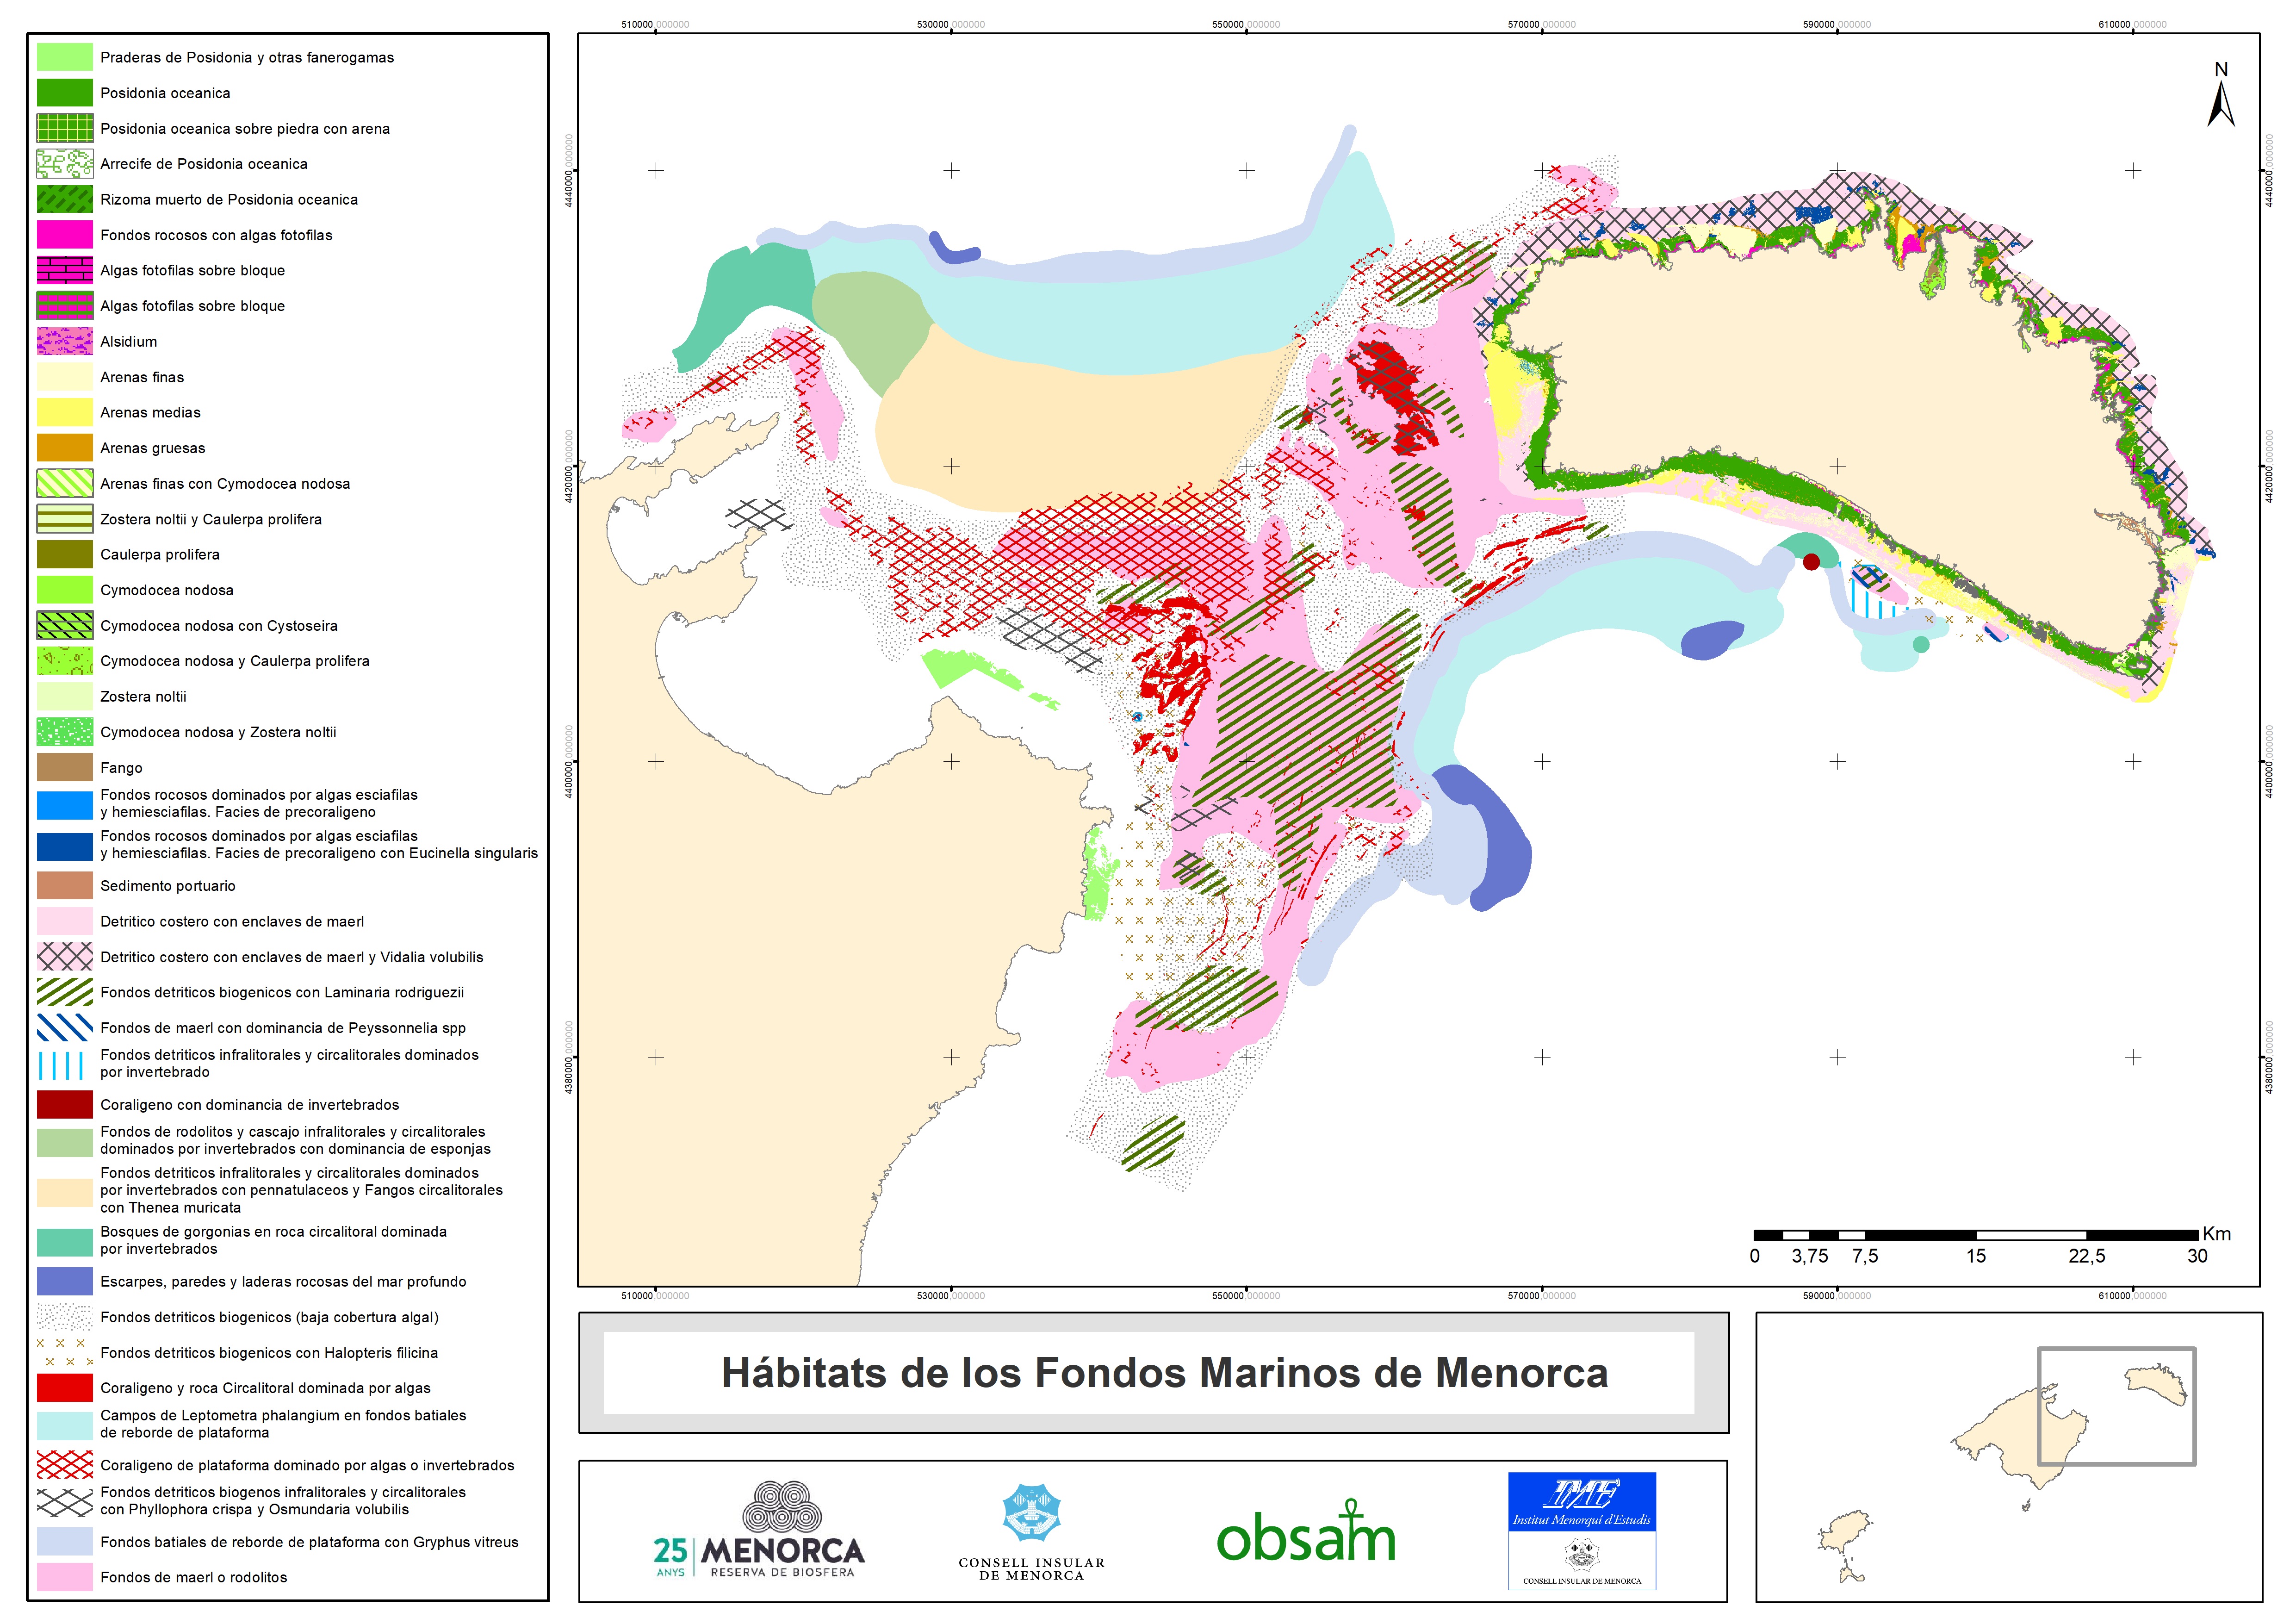 Compile marine maps to improve management of the Balearic sea